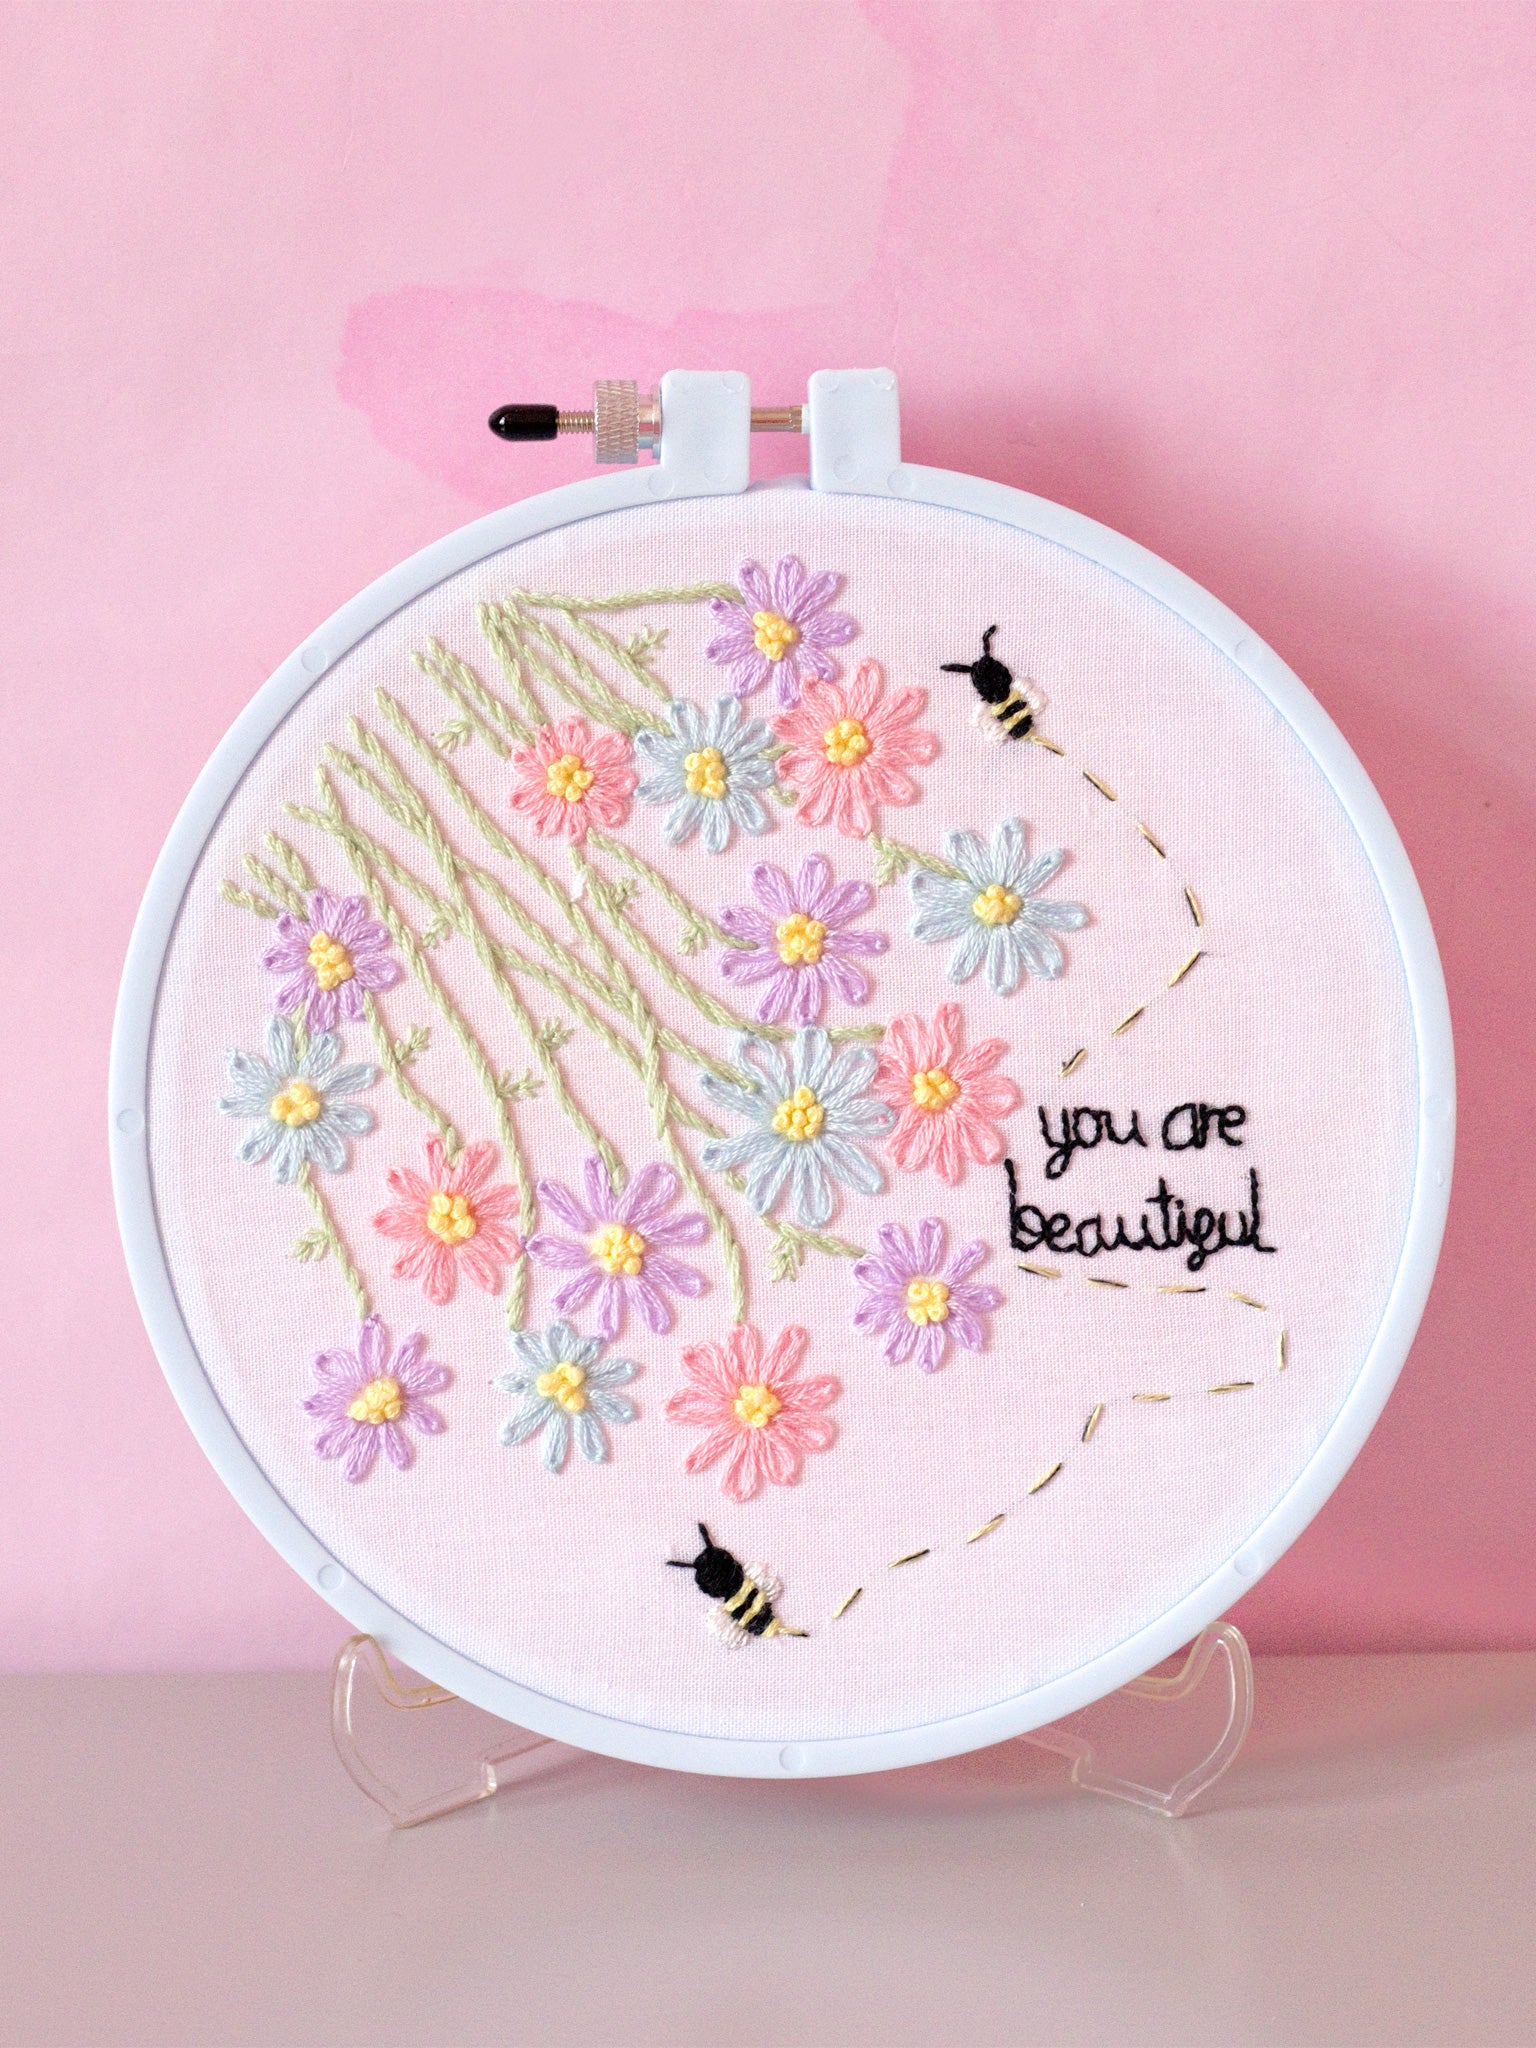 A blue embroidery hoop with white fabric stitched with flowers, bees, and text that reads you are beautiful. Displayed in front of a pink-marbled wall.